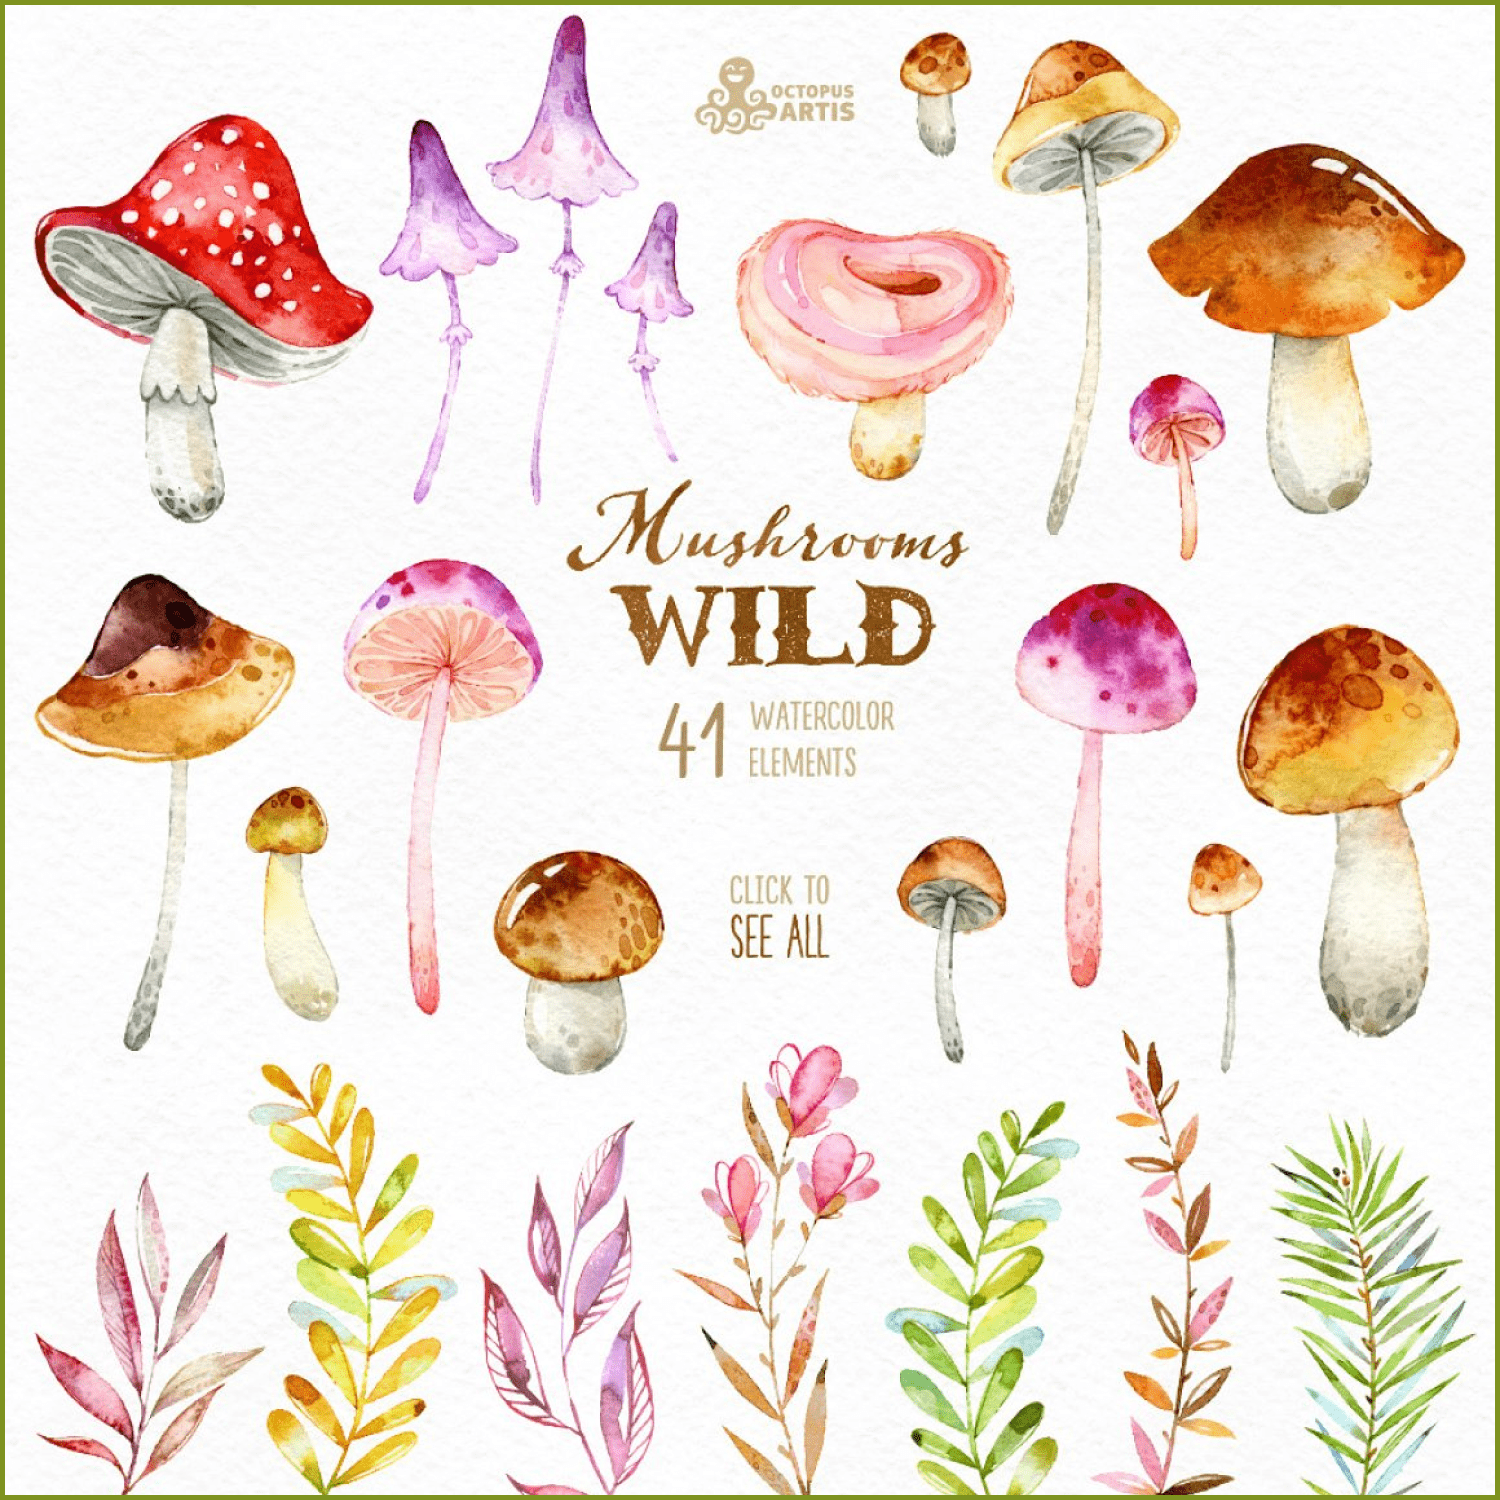 Wild mushrooms. forest collection - main image preview.